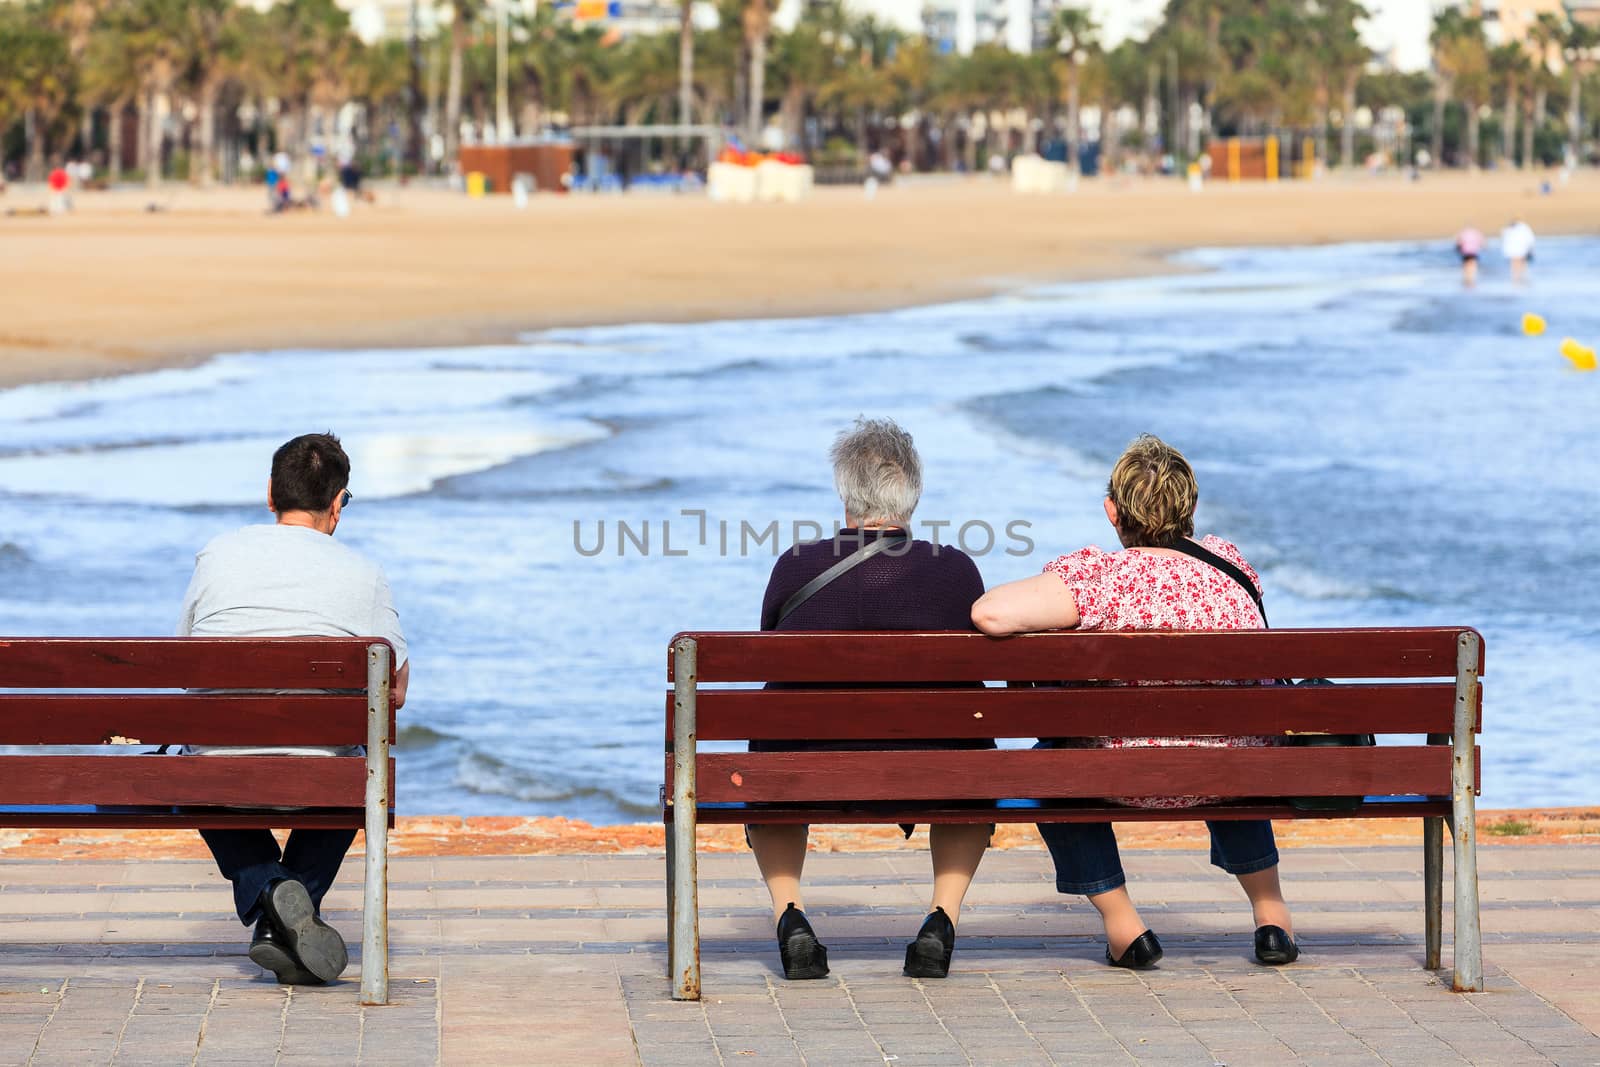 Seniors sitting and on the benches in front of the ocean or sea by Nobilior